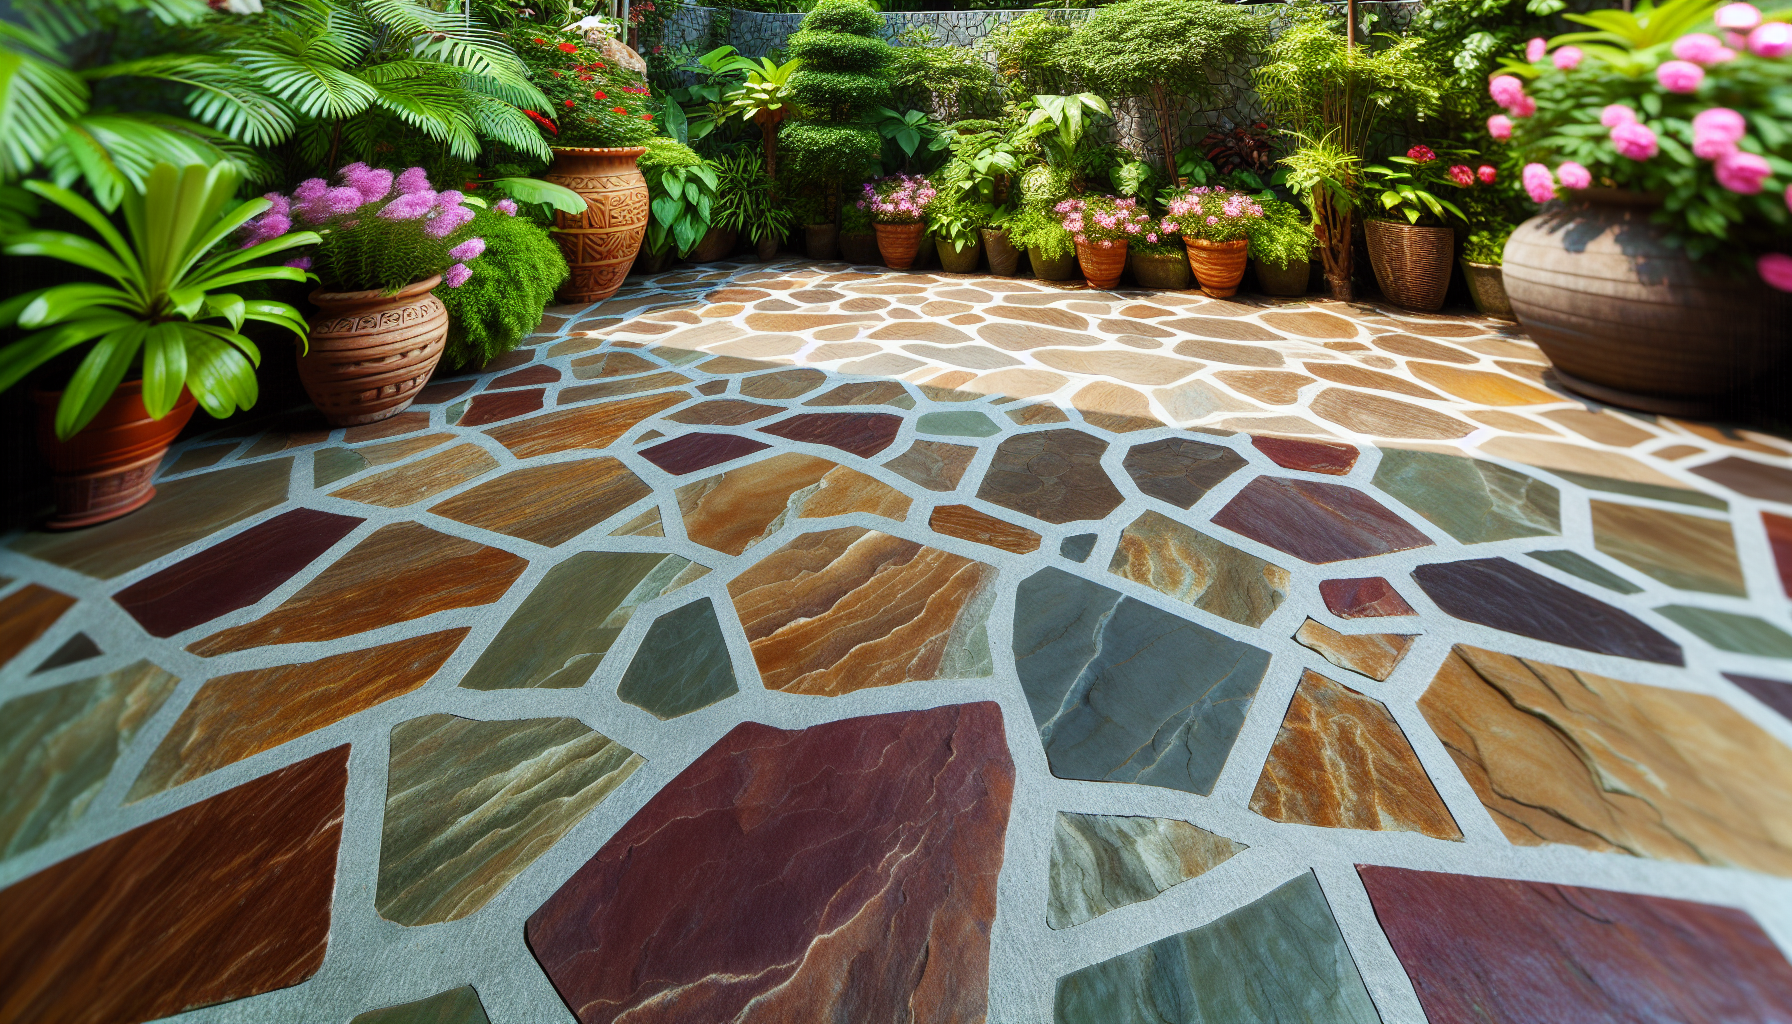 Irregularly shaped natural stone crazy paving in outdoor space